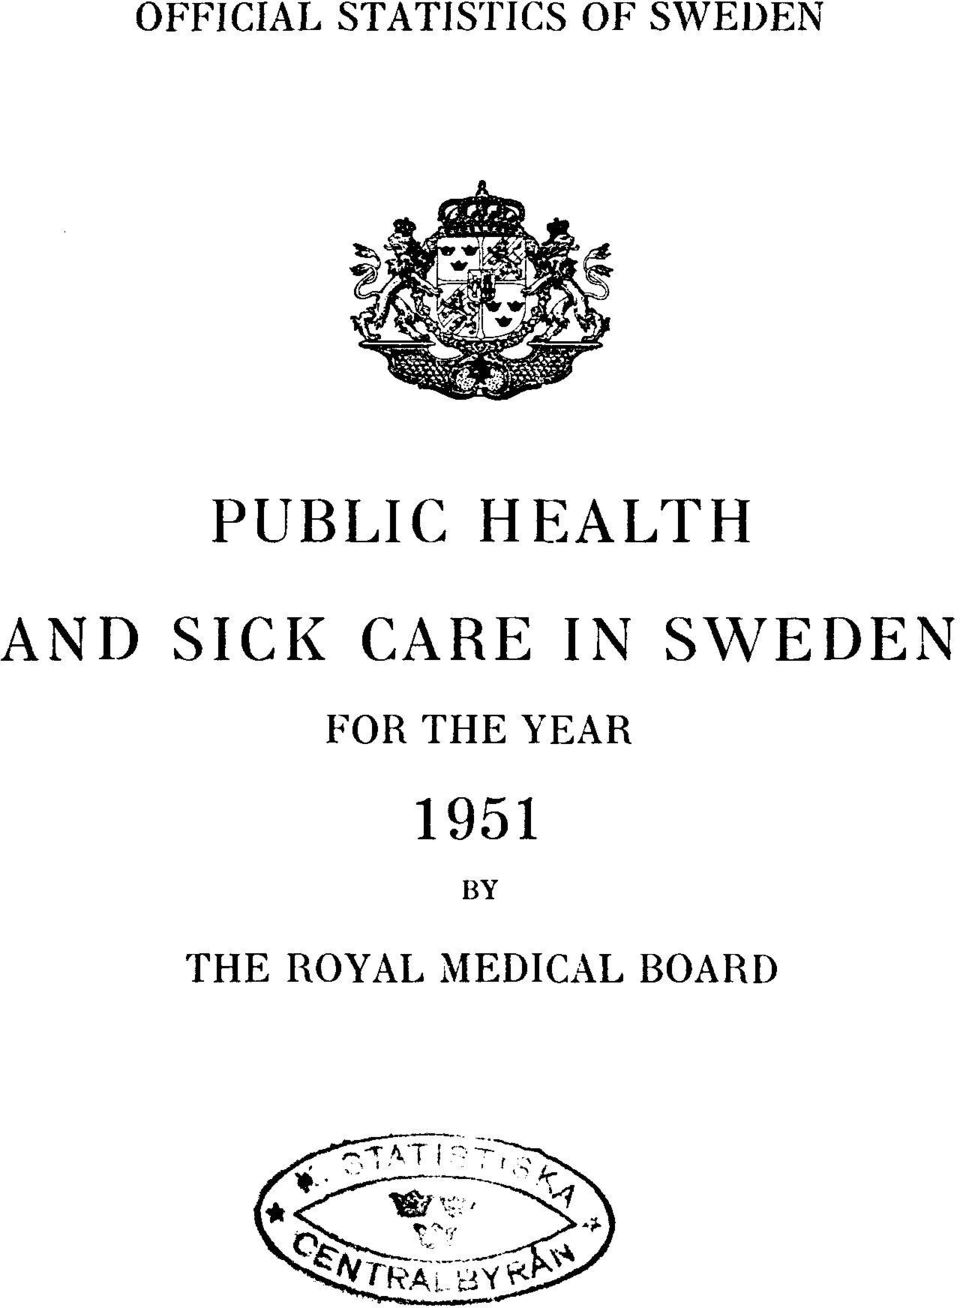 SICK CARE IN SWEDEN FOR THE